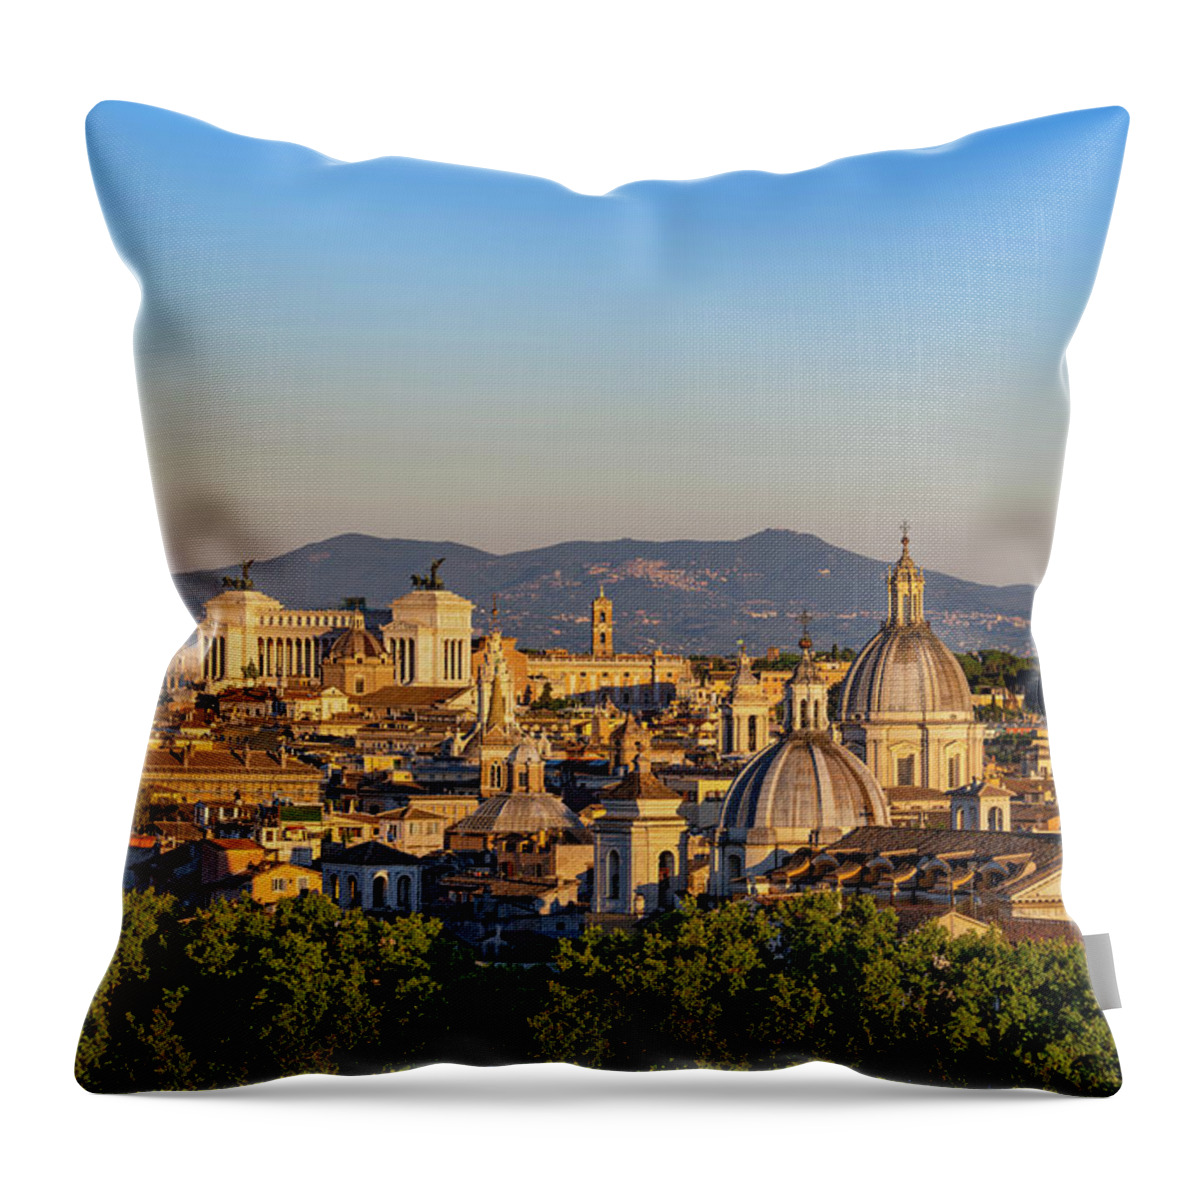 Rome Throw Pillow featuring the photograph City Of Rome Sunset Cityscape In Italy by Artur Bogacki